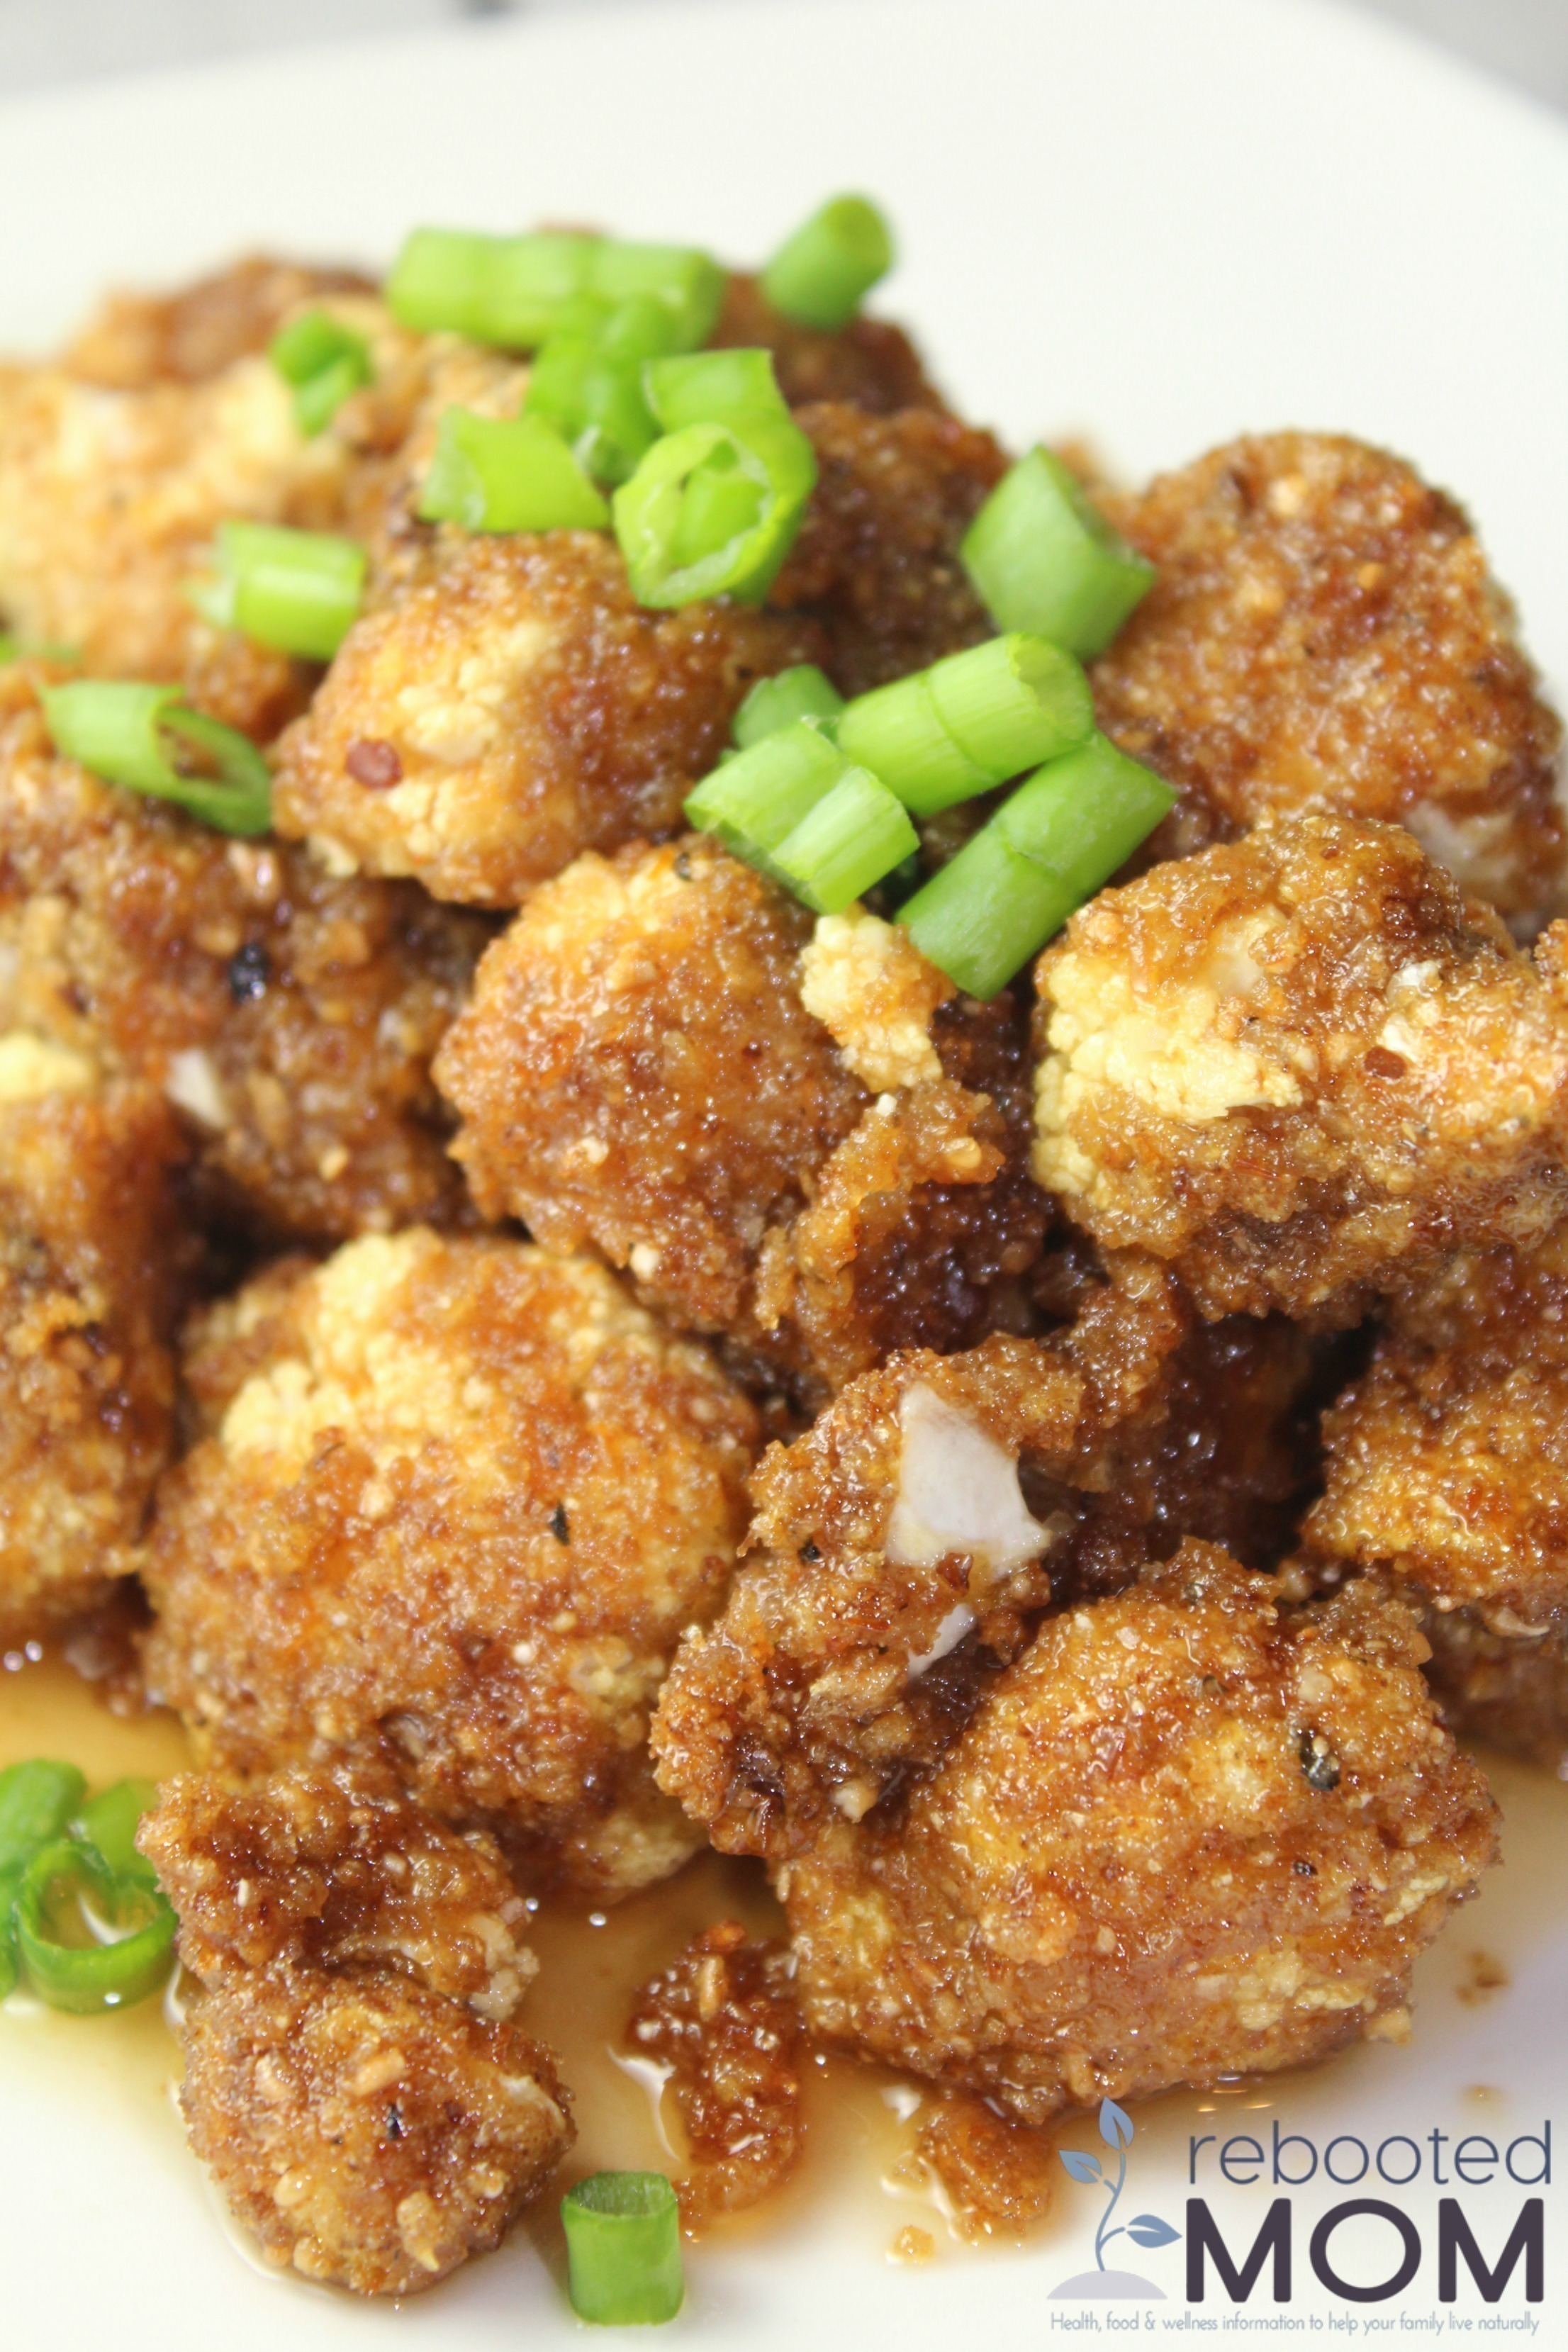 This healthy honey garlic baked cauliflower comes together easily with simple ingredients and is perfect for a simple meatless meal option!